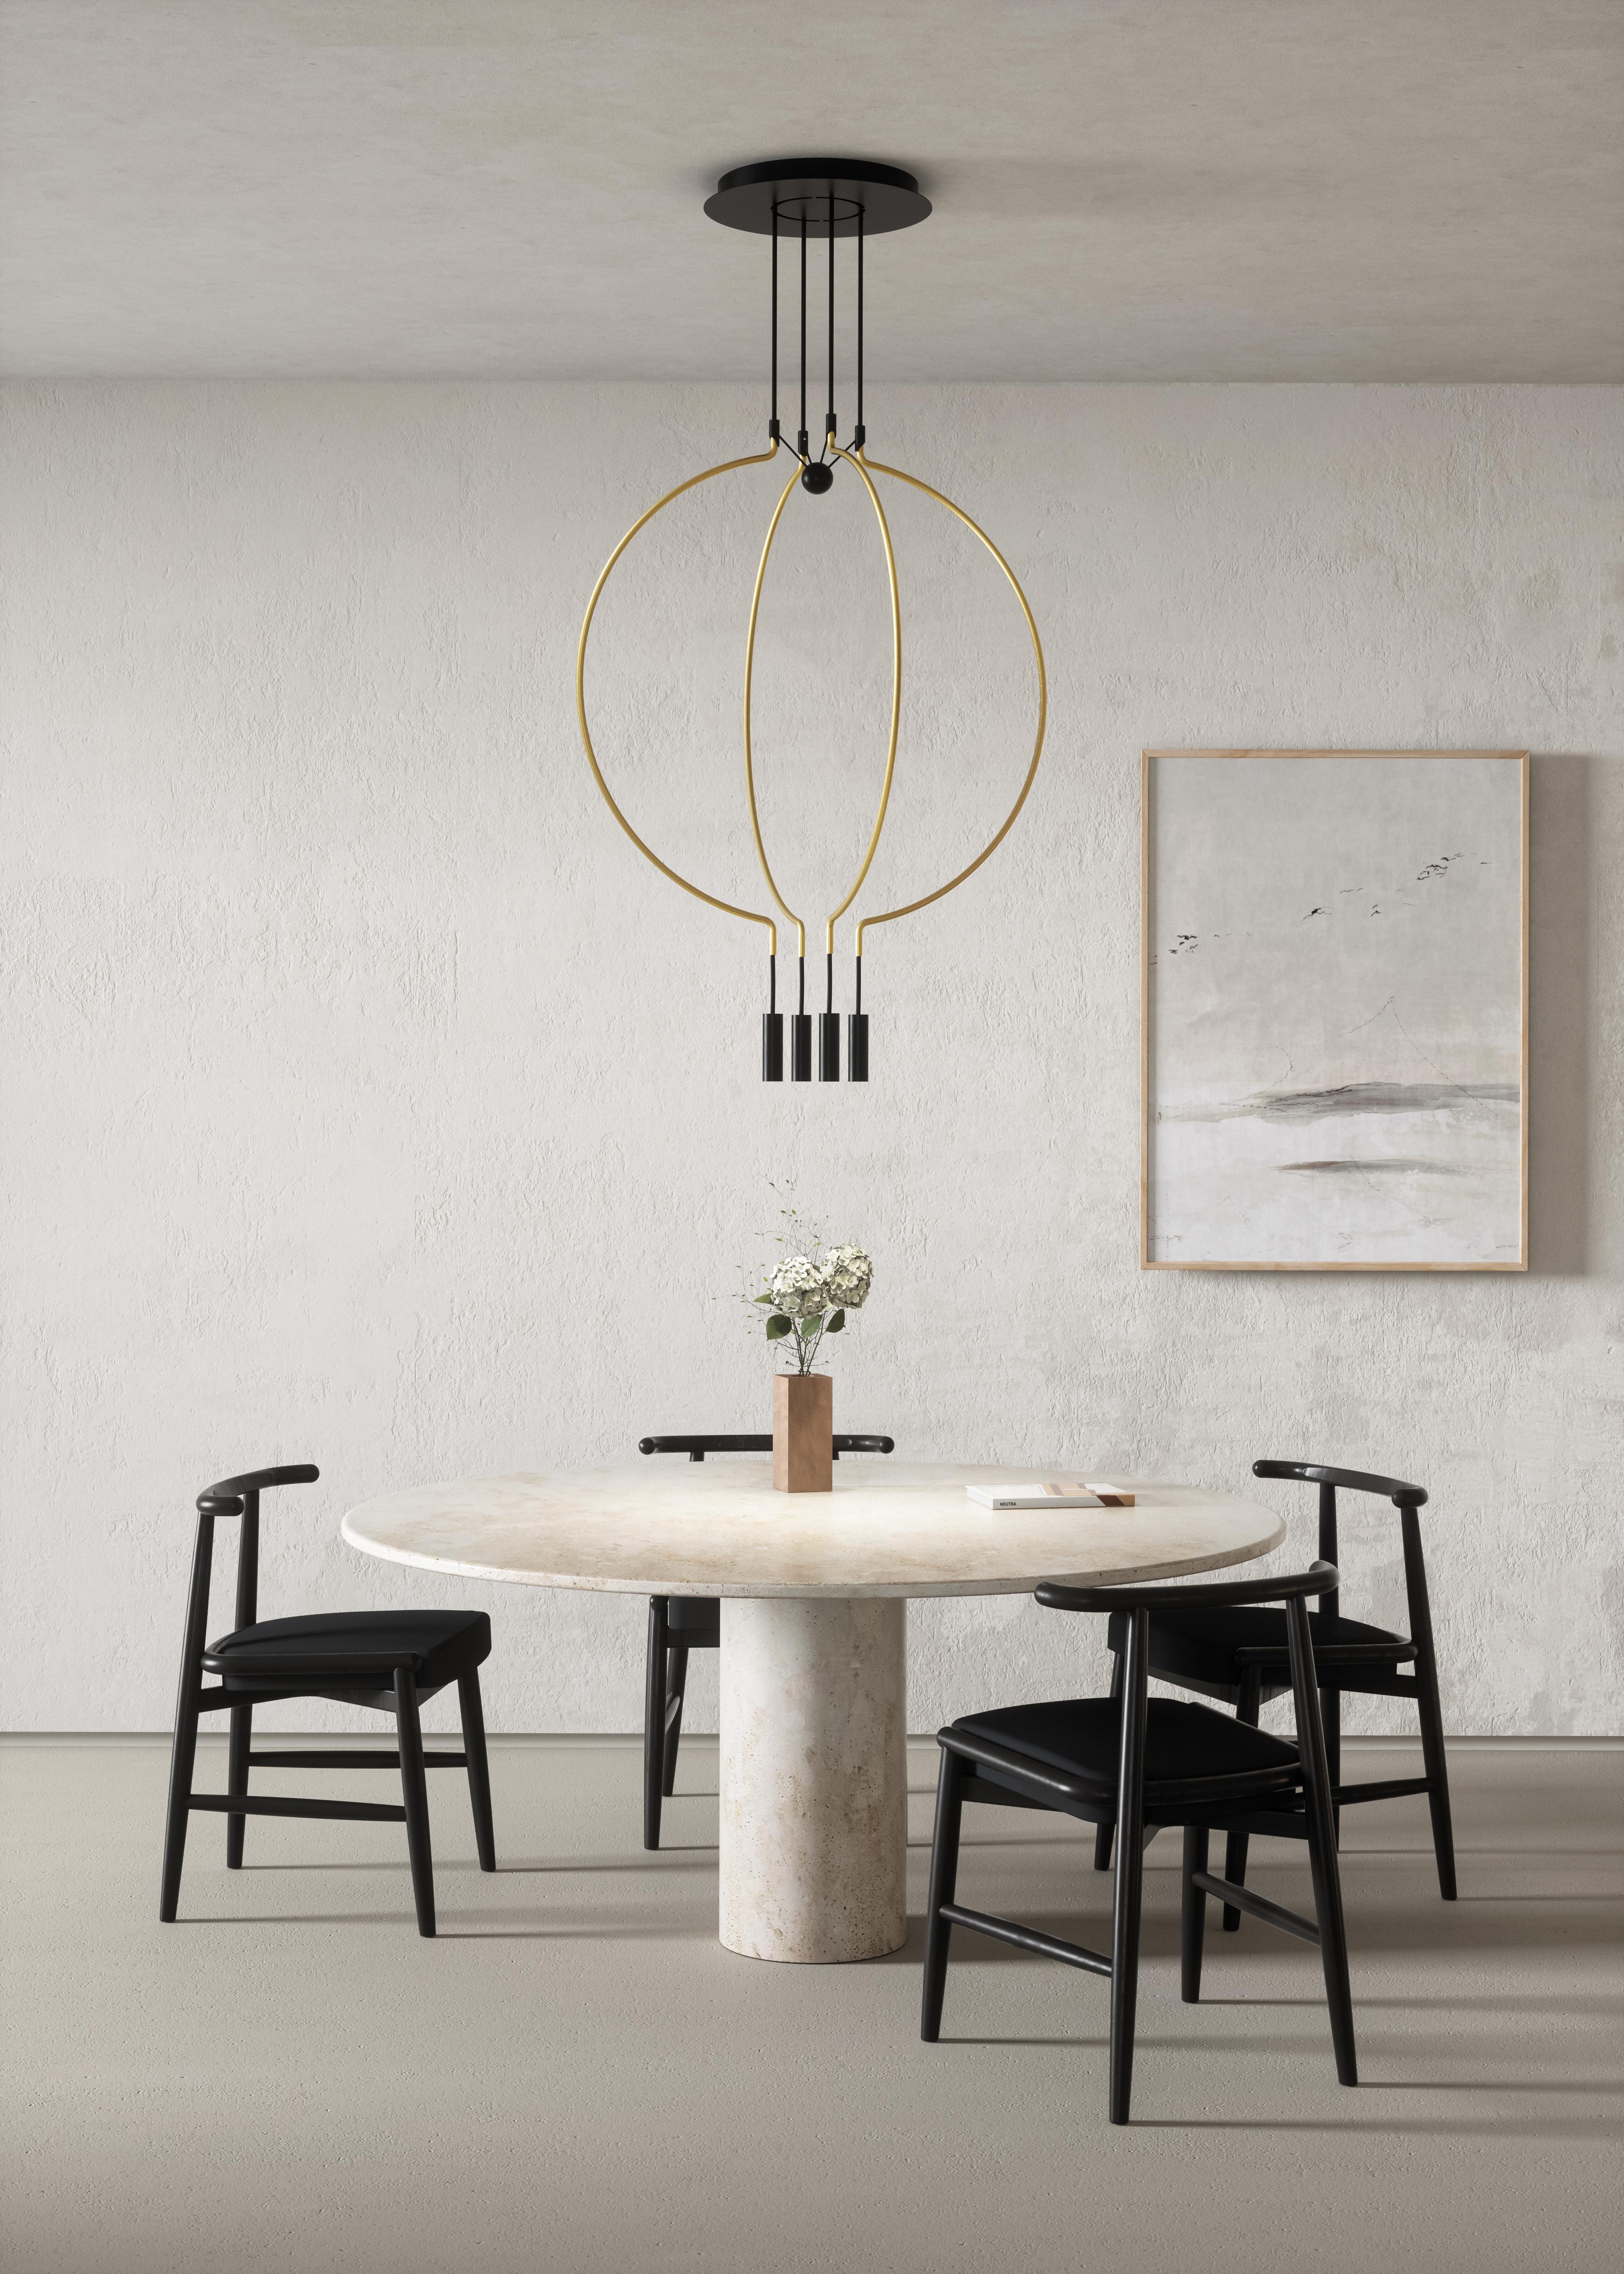 Axolight Liaison Model M2 Pendant Lamp in Gold/Black by Sara Moroni

Modular lightness and elegance. Liaison tells about the perfect balance of three geometric archetypes: sphere, circle and cylinder compose a system that includes the single pendant